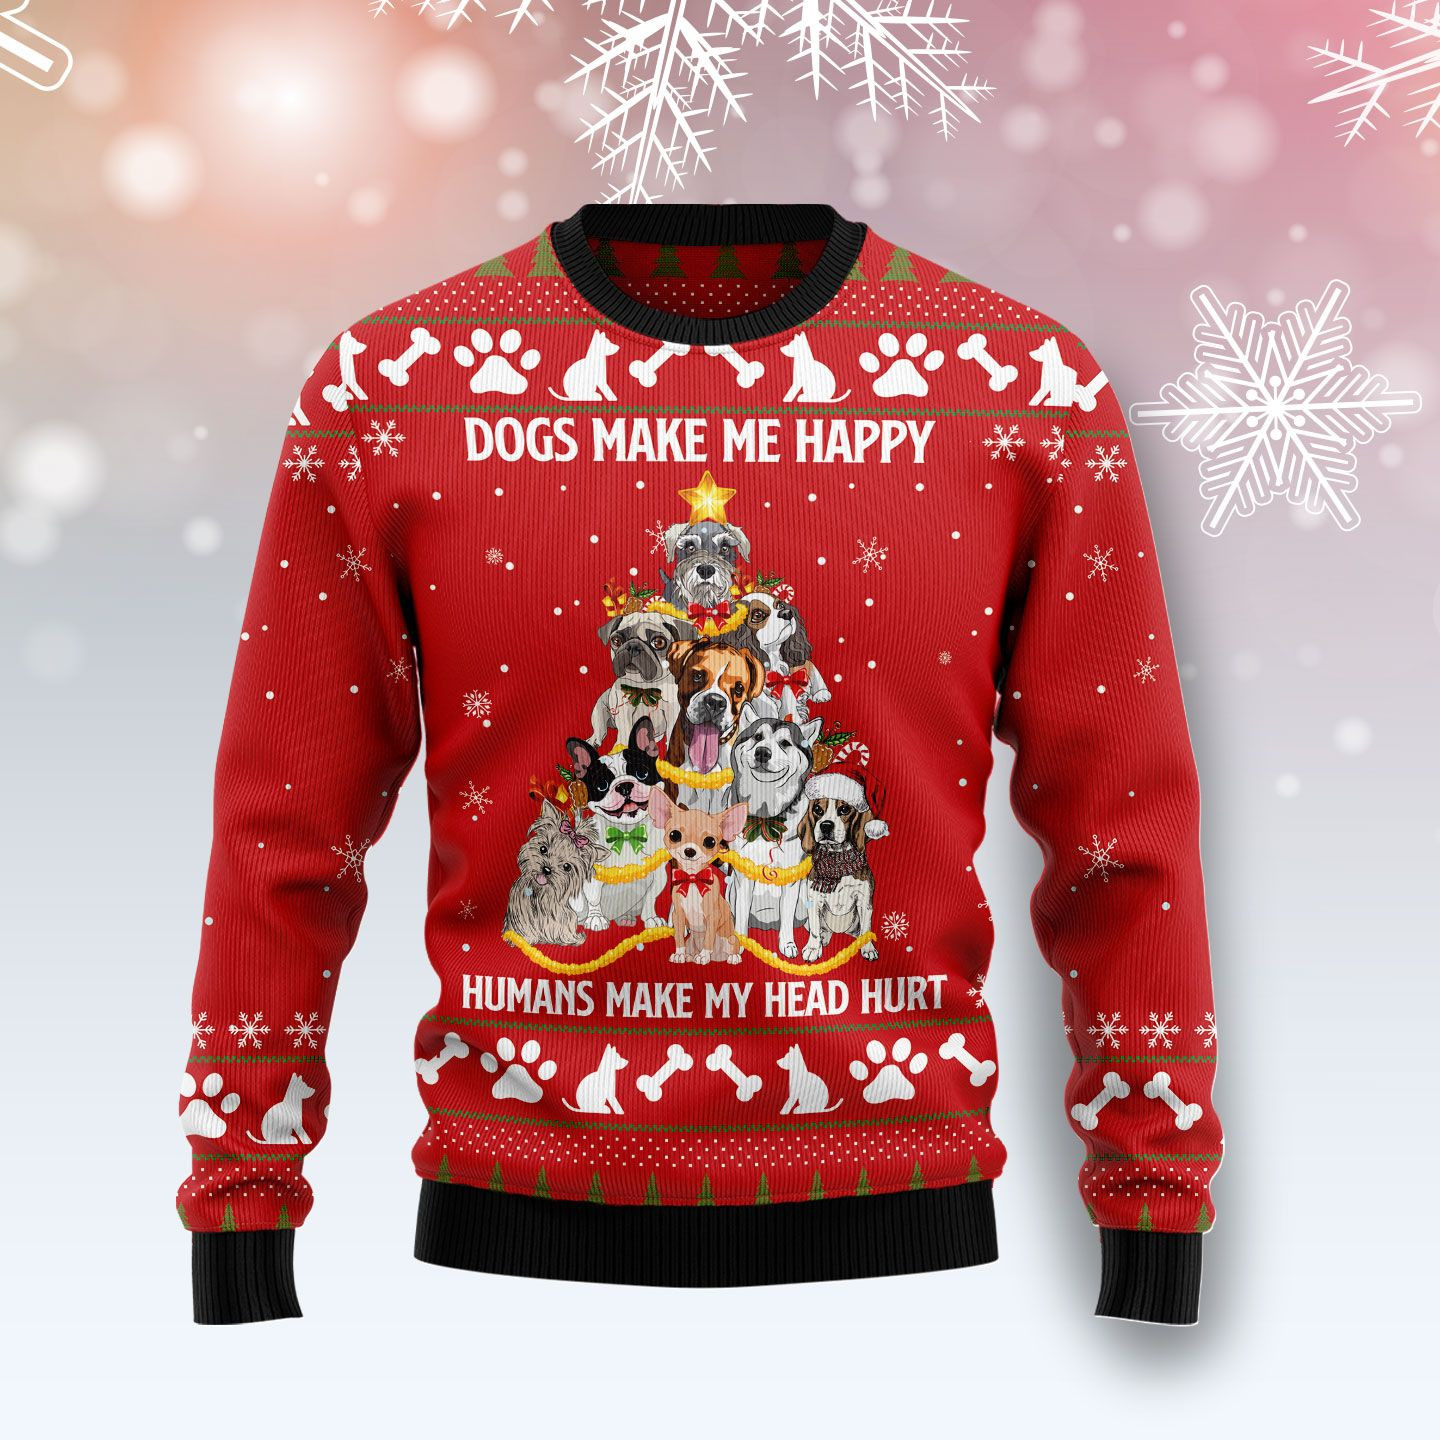 Dogs Make Me Happy Ugly Christmas Sweater, Ugly Sweater For Men Women, Holiday Sweater